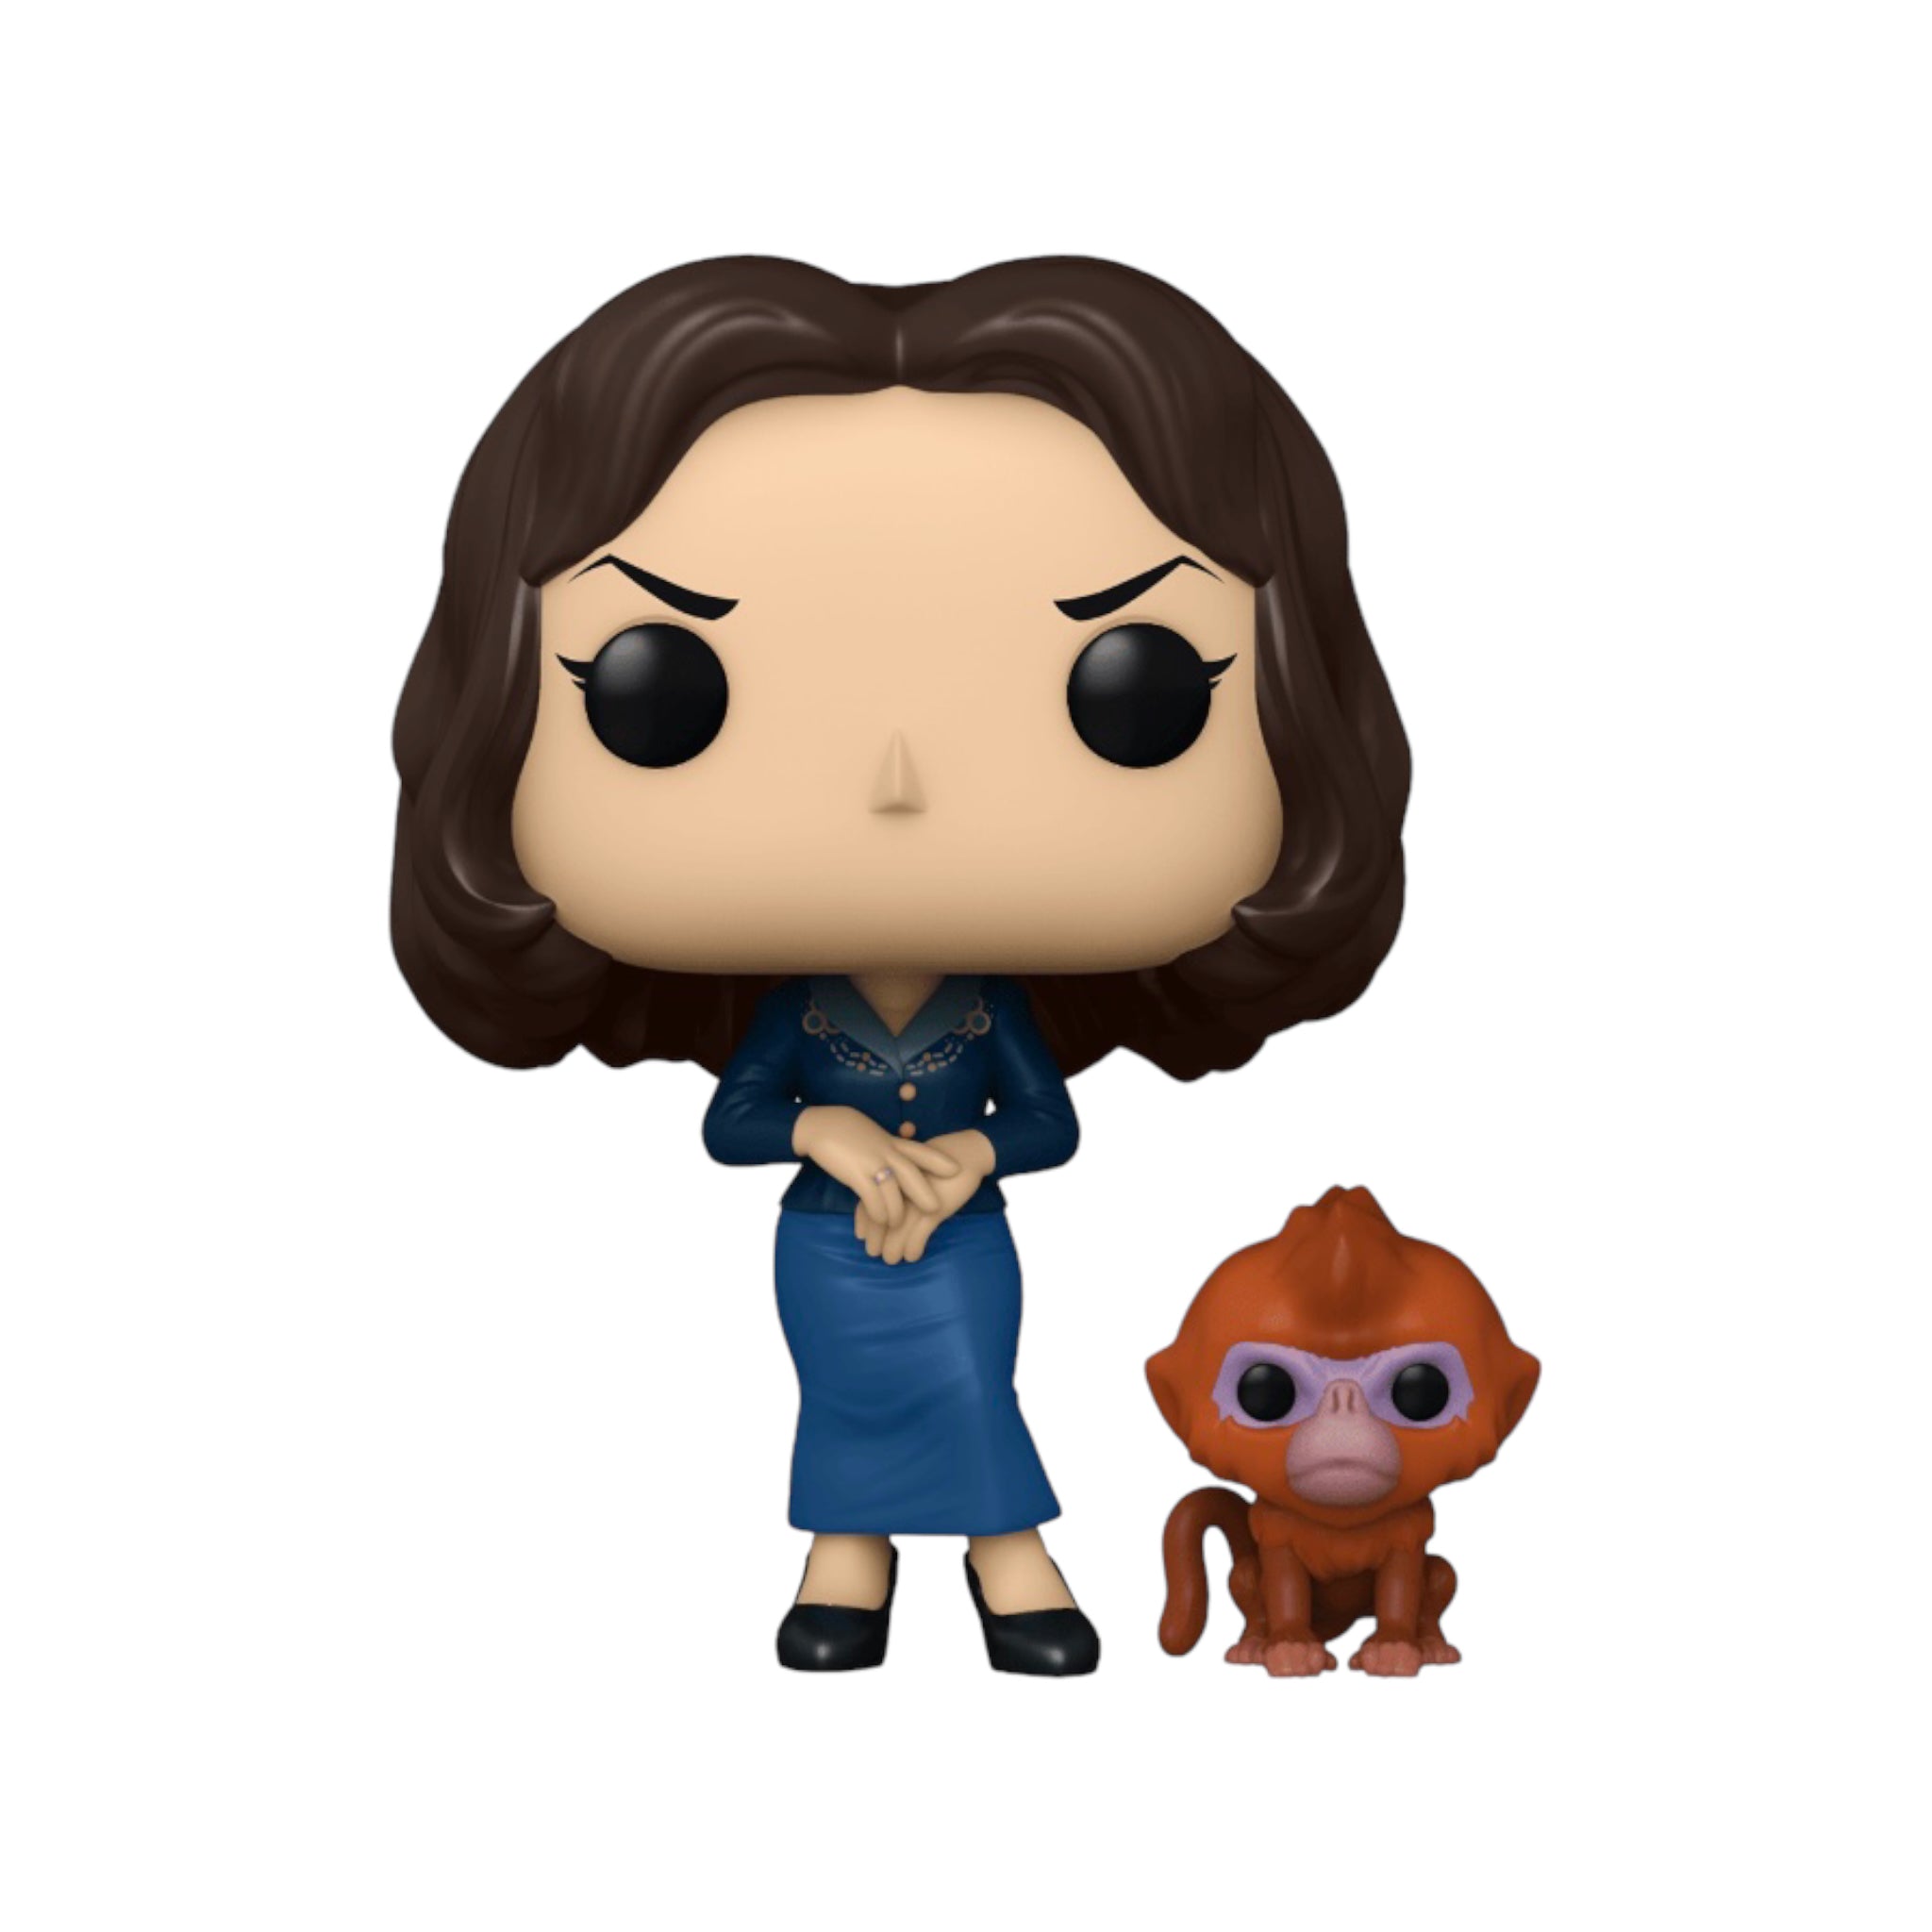 Mrs. Coulter with The Golden Monkey #1111 Funko Pop! - His Dark Materials